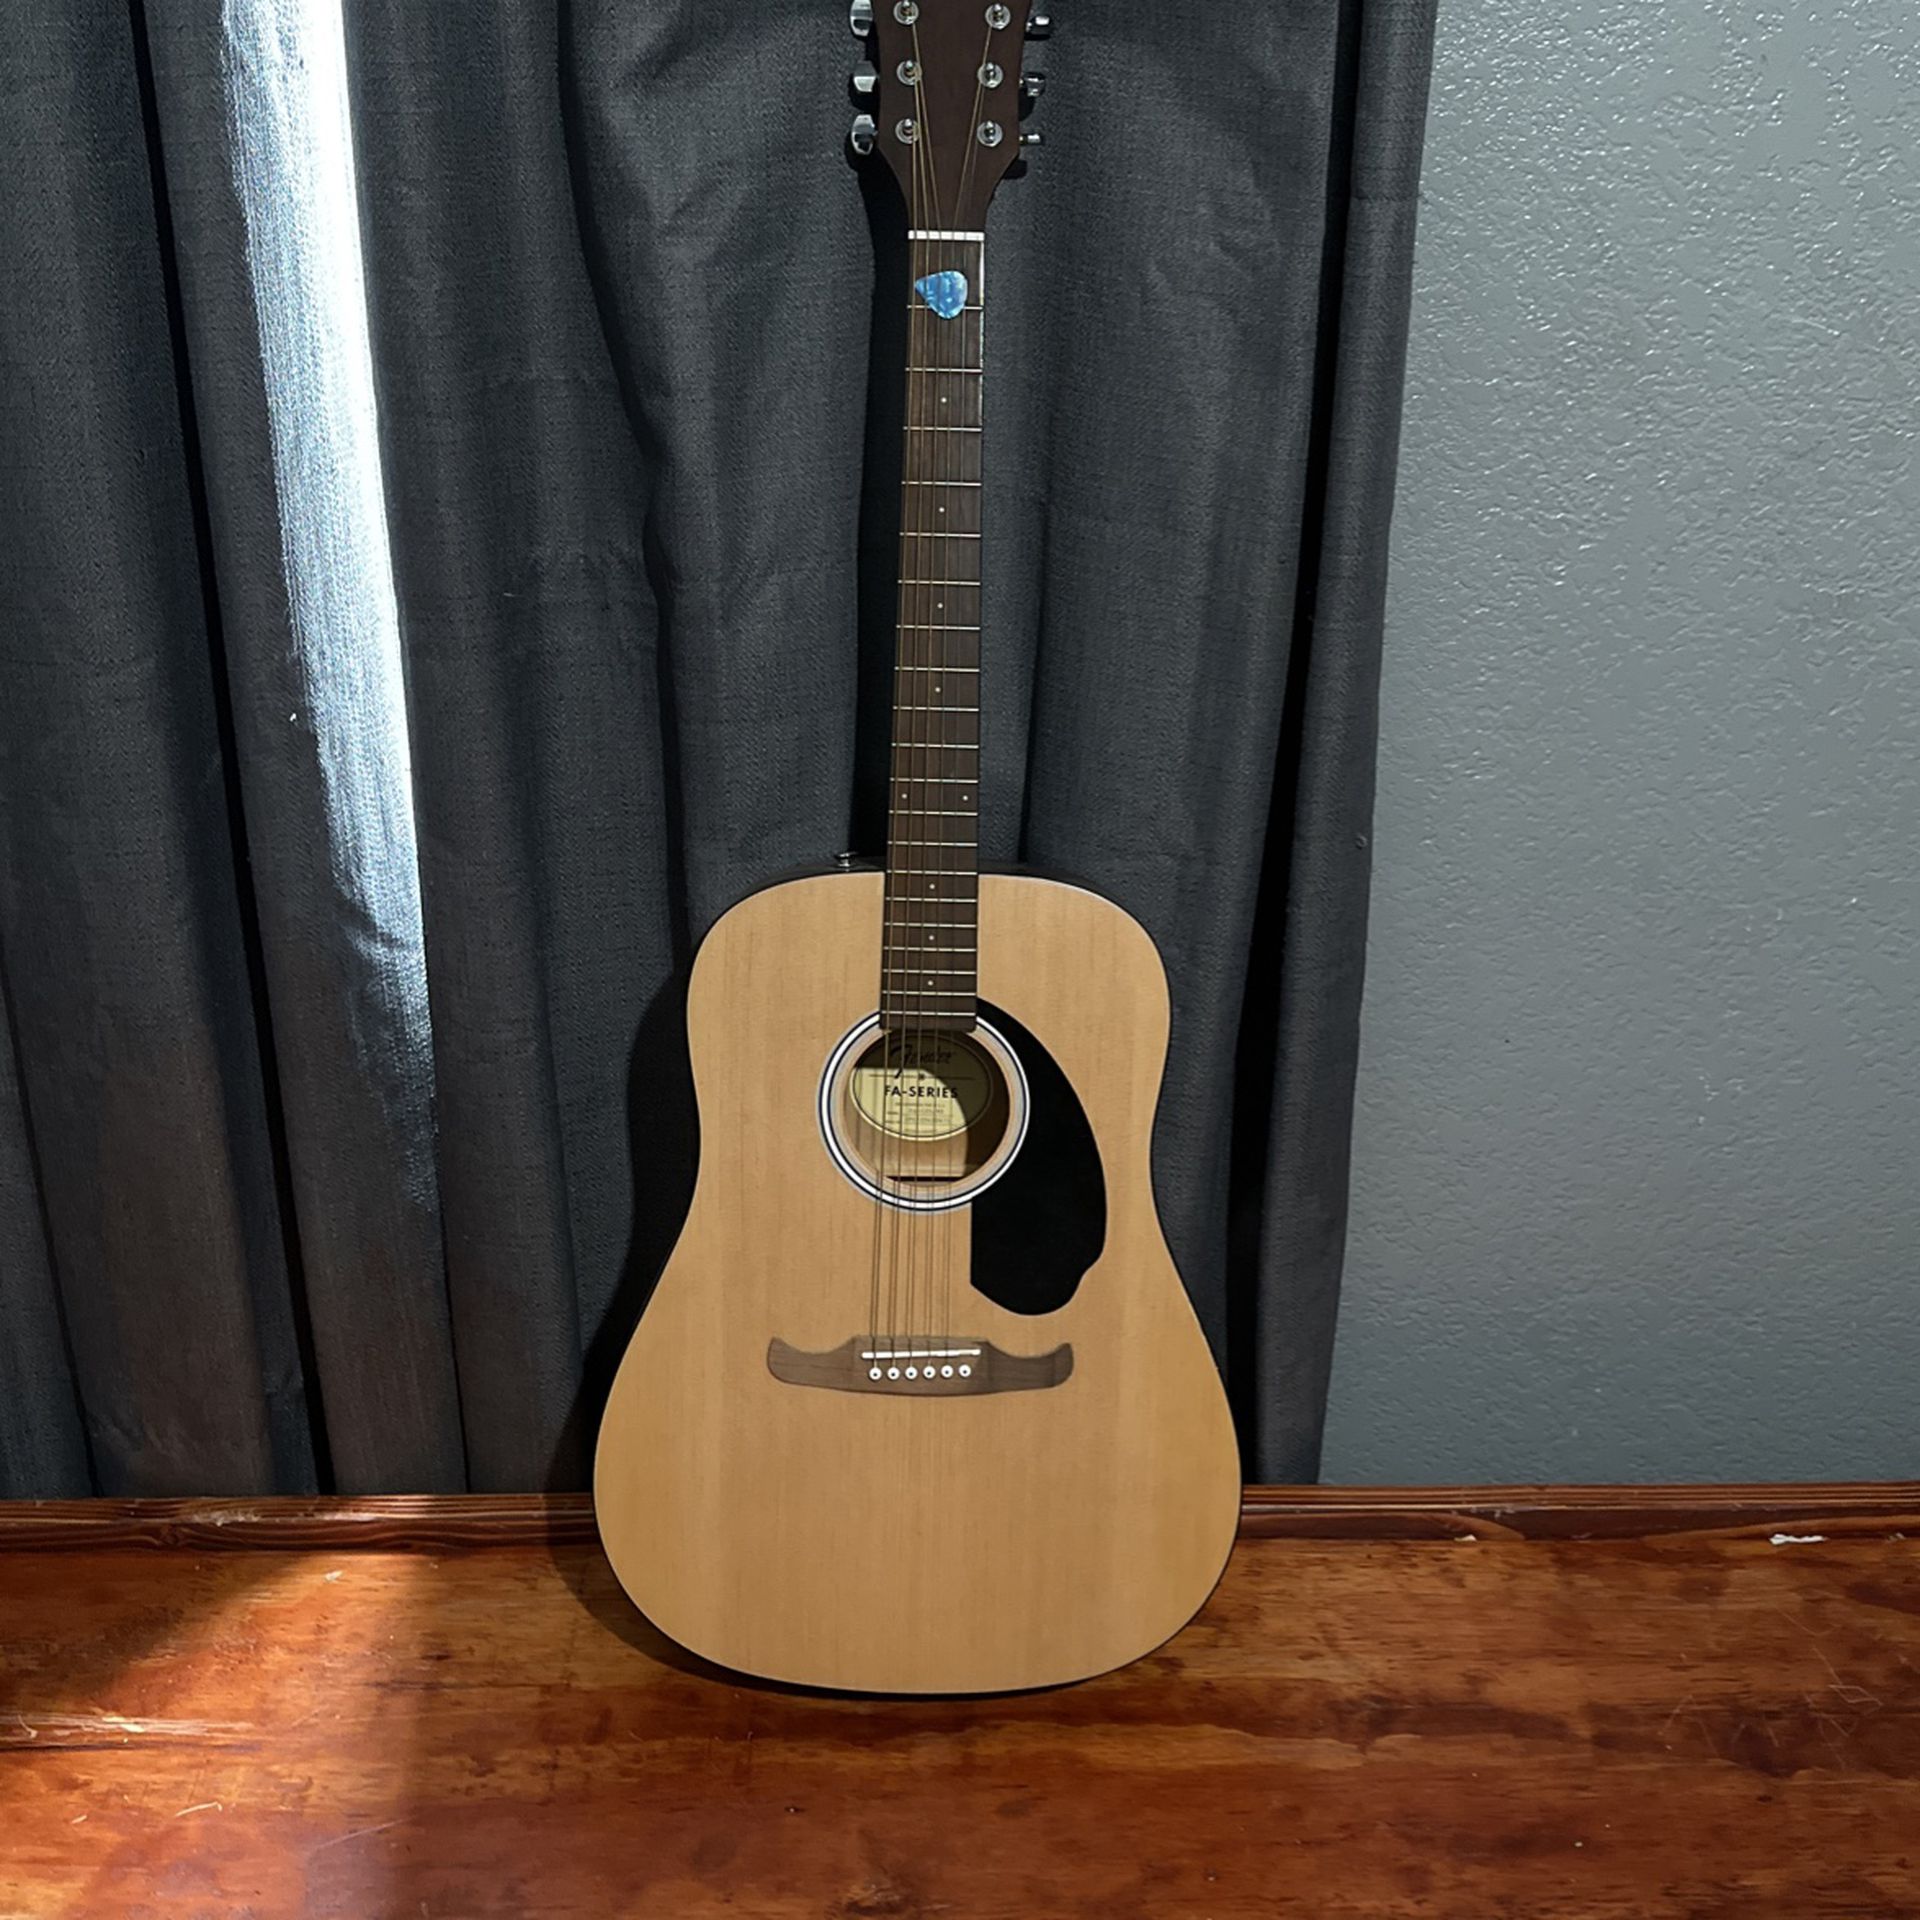 Fender Guitar With Stand